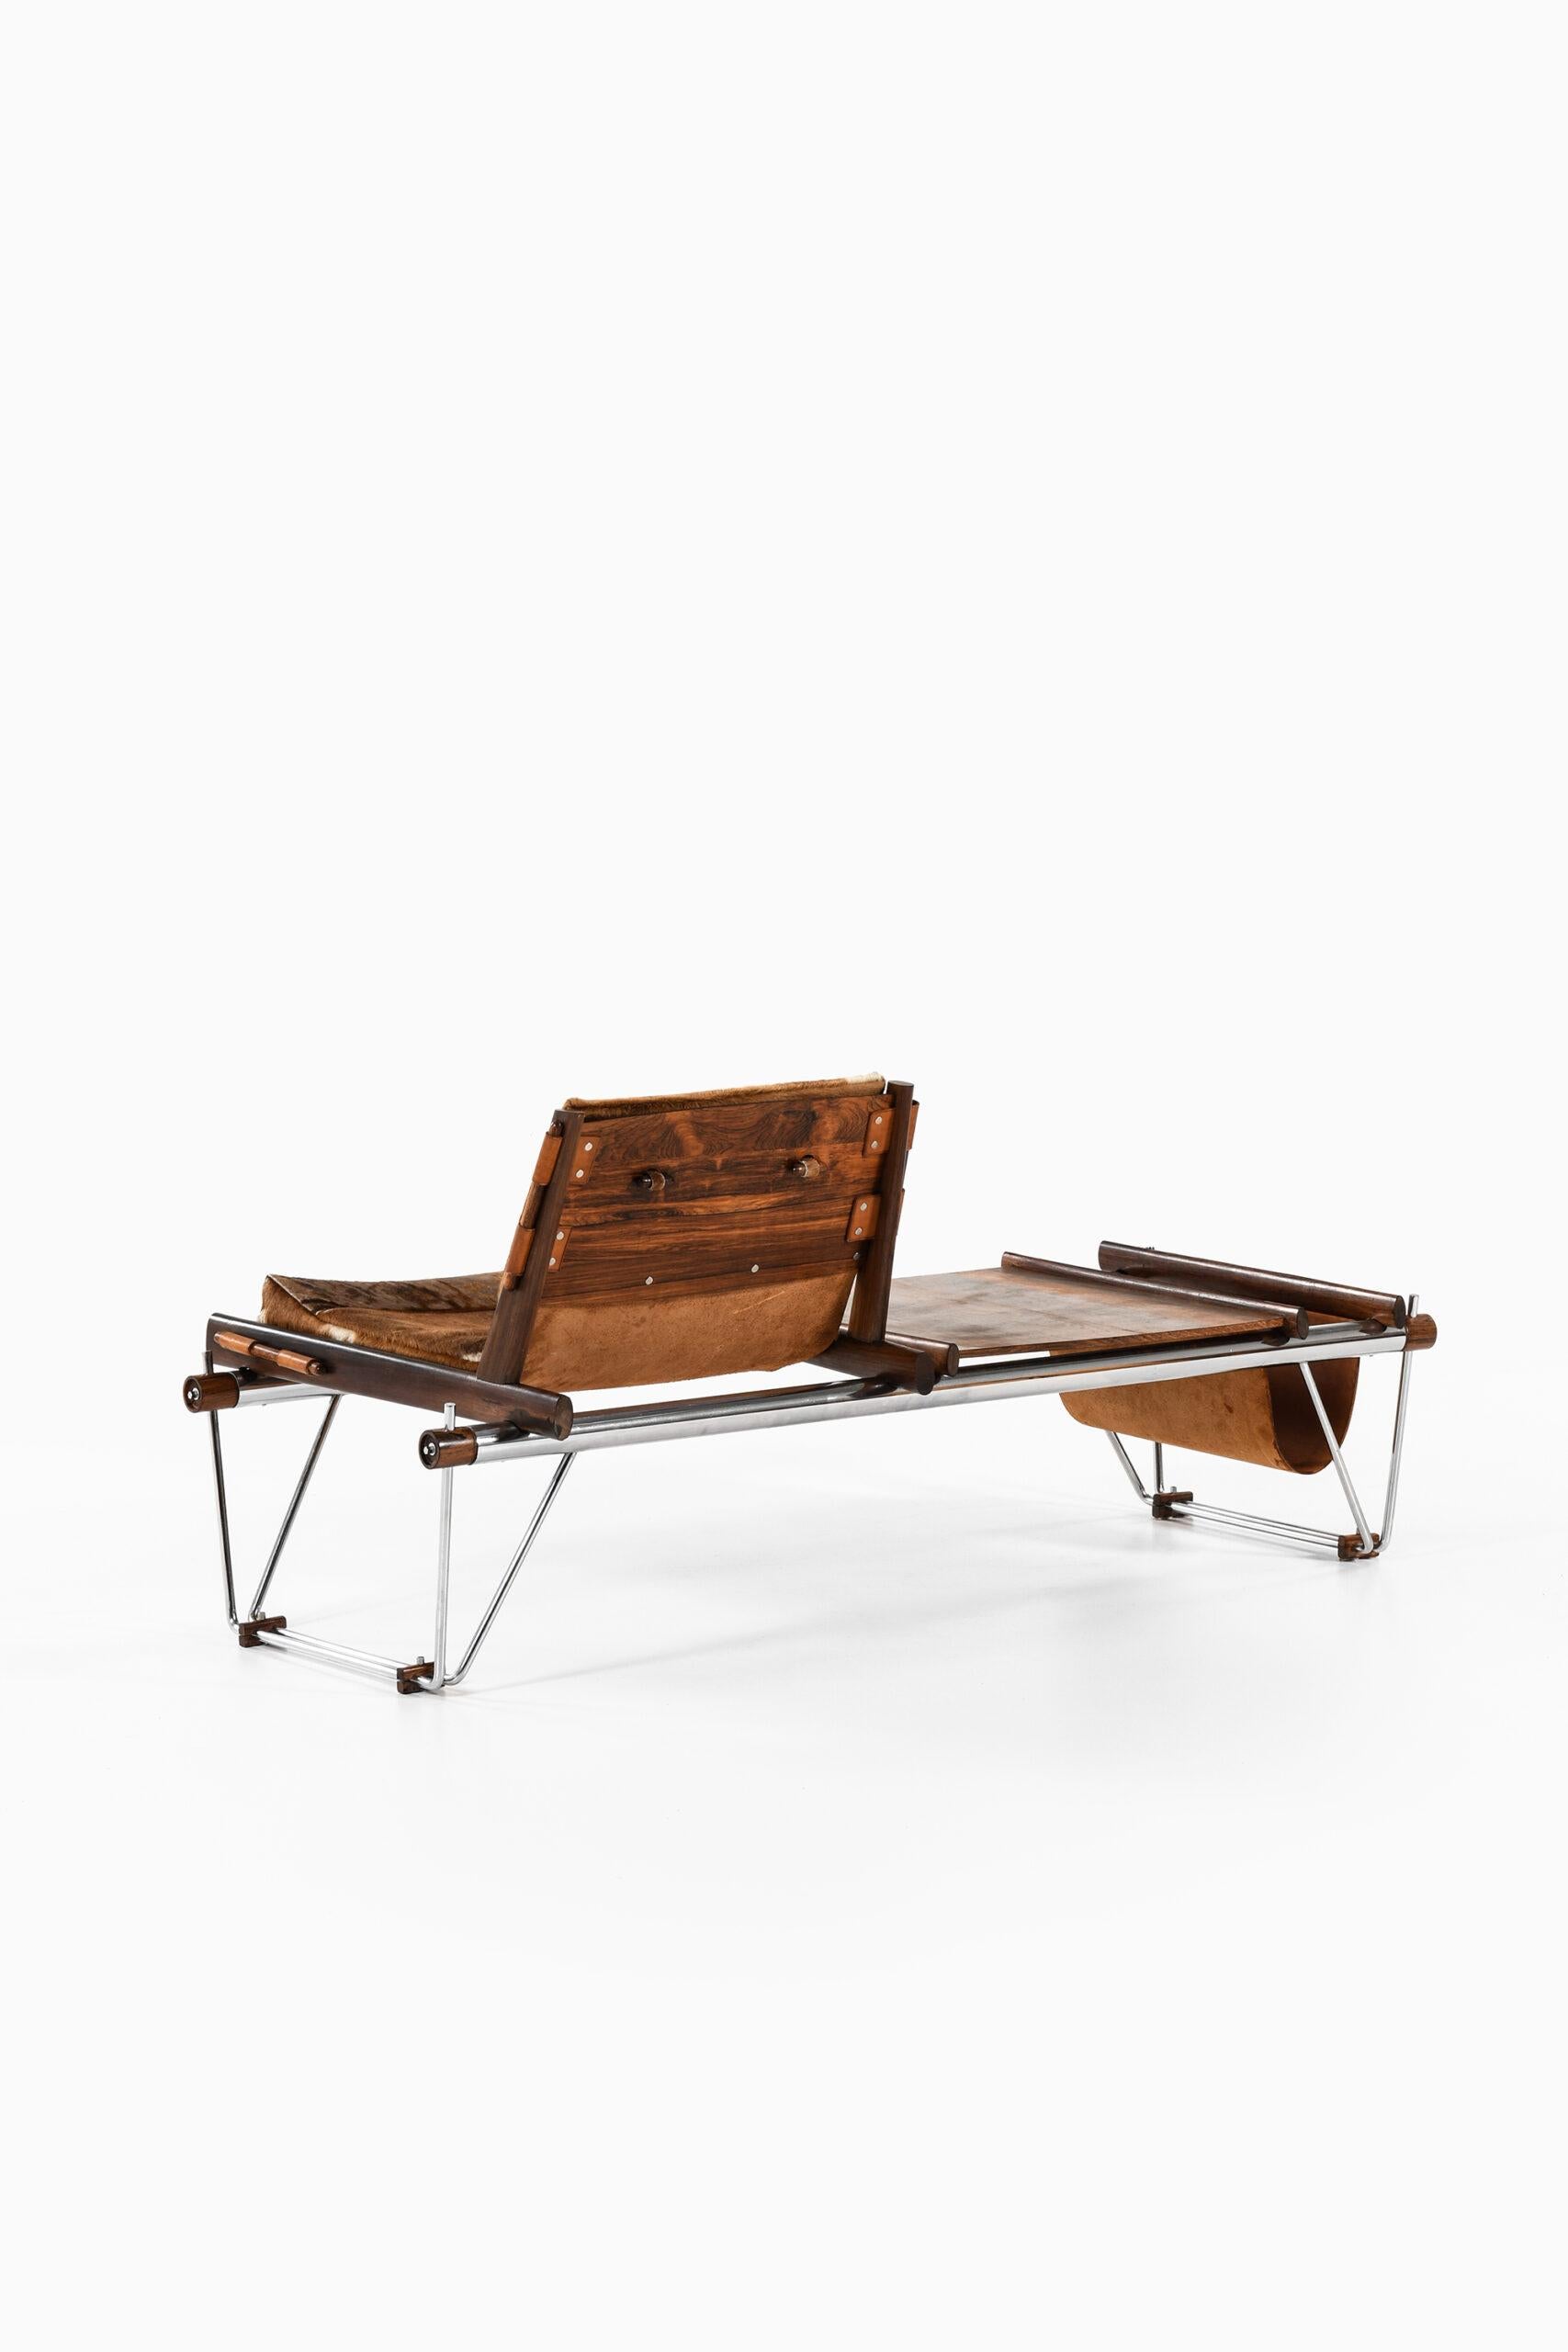 Percival Lafer Bench Produced by Lafer MP in Brazil 7